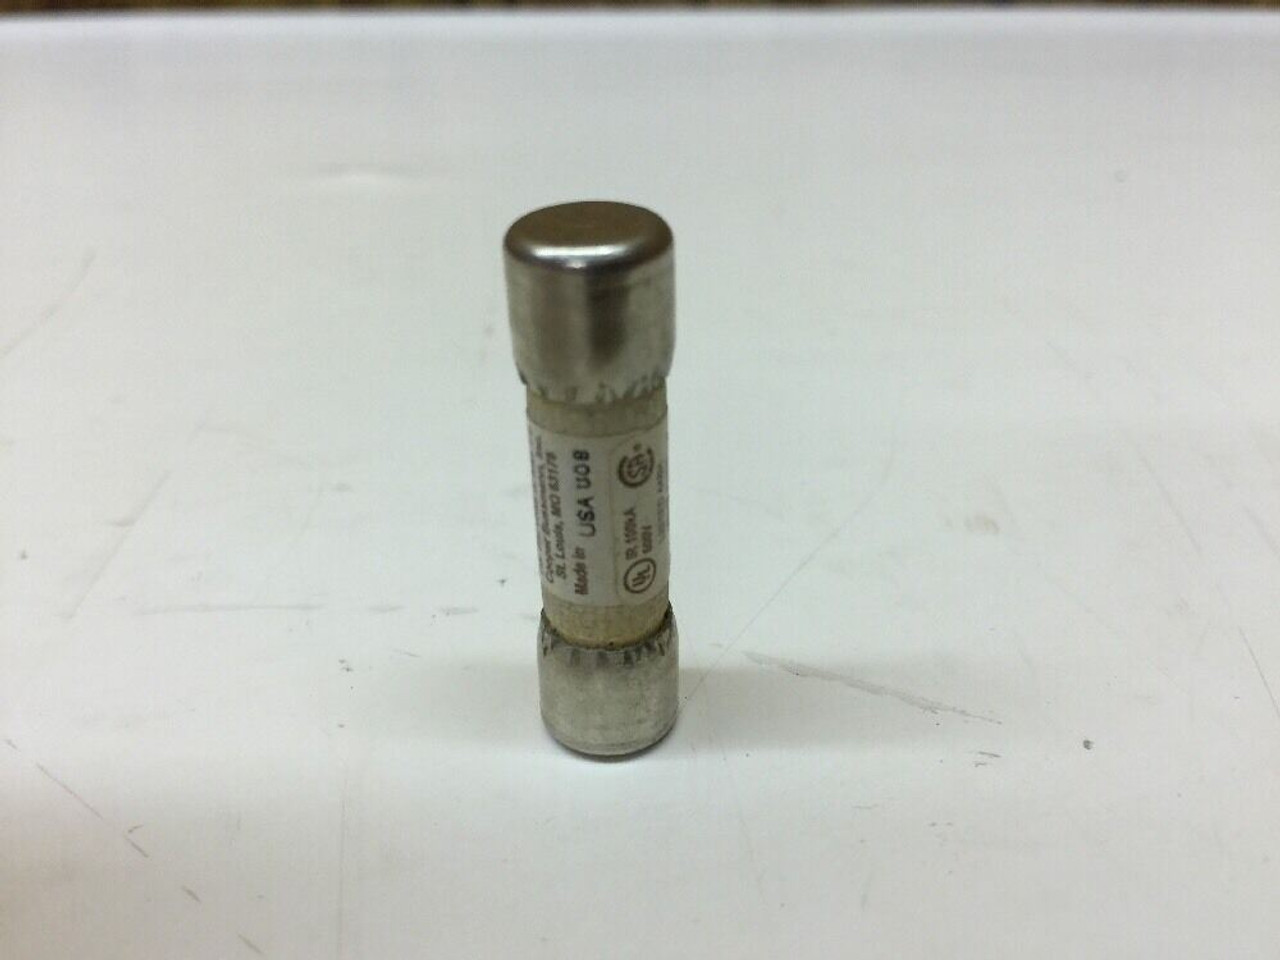 Fuse Cartridge KTK-3 Revere Electric Supply Tube Type Opaque Body 